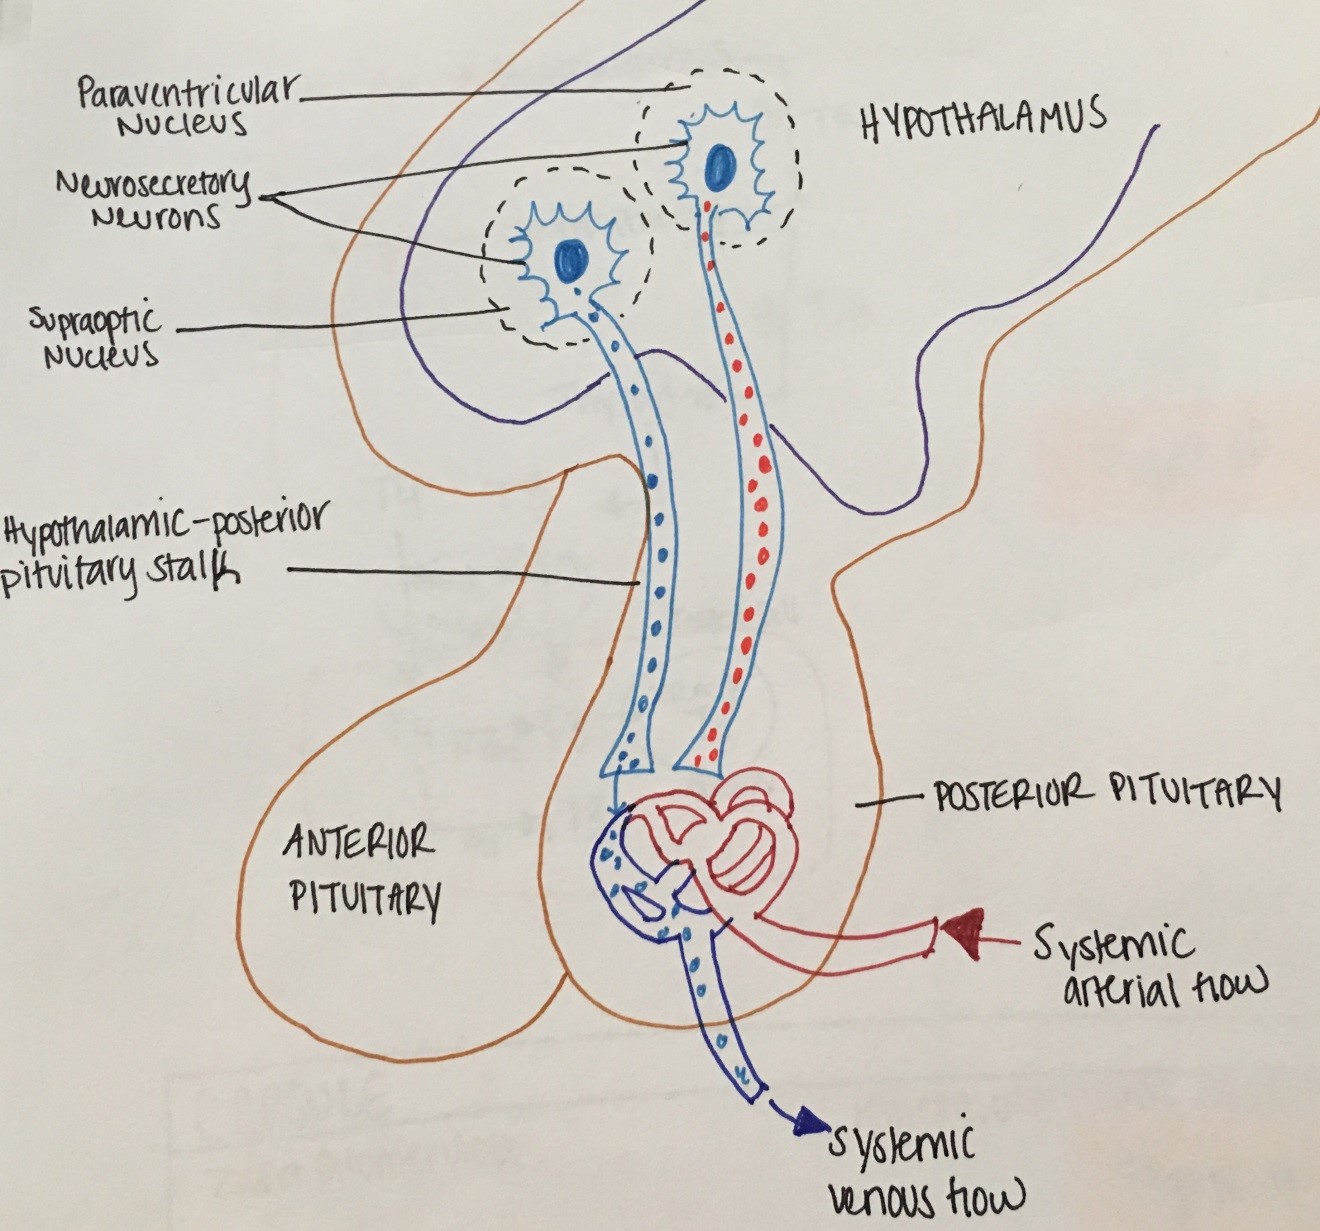 Figure 5: physiology of the hypothalamus